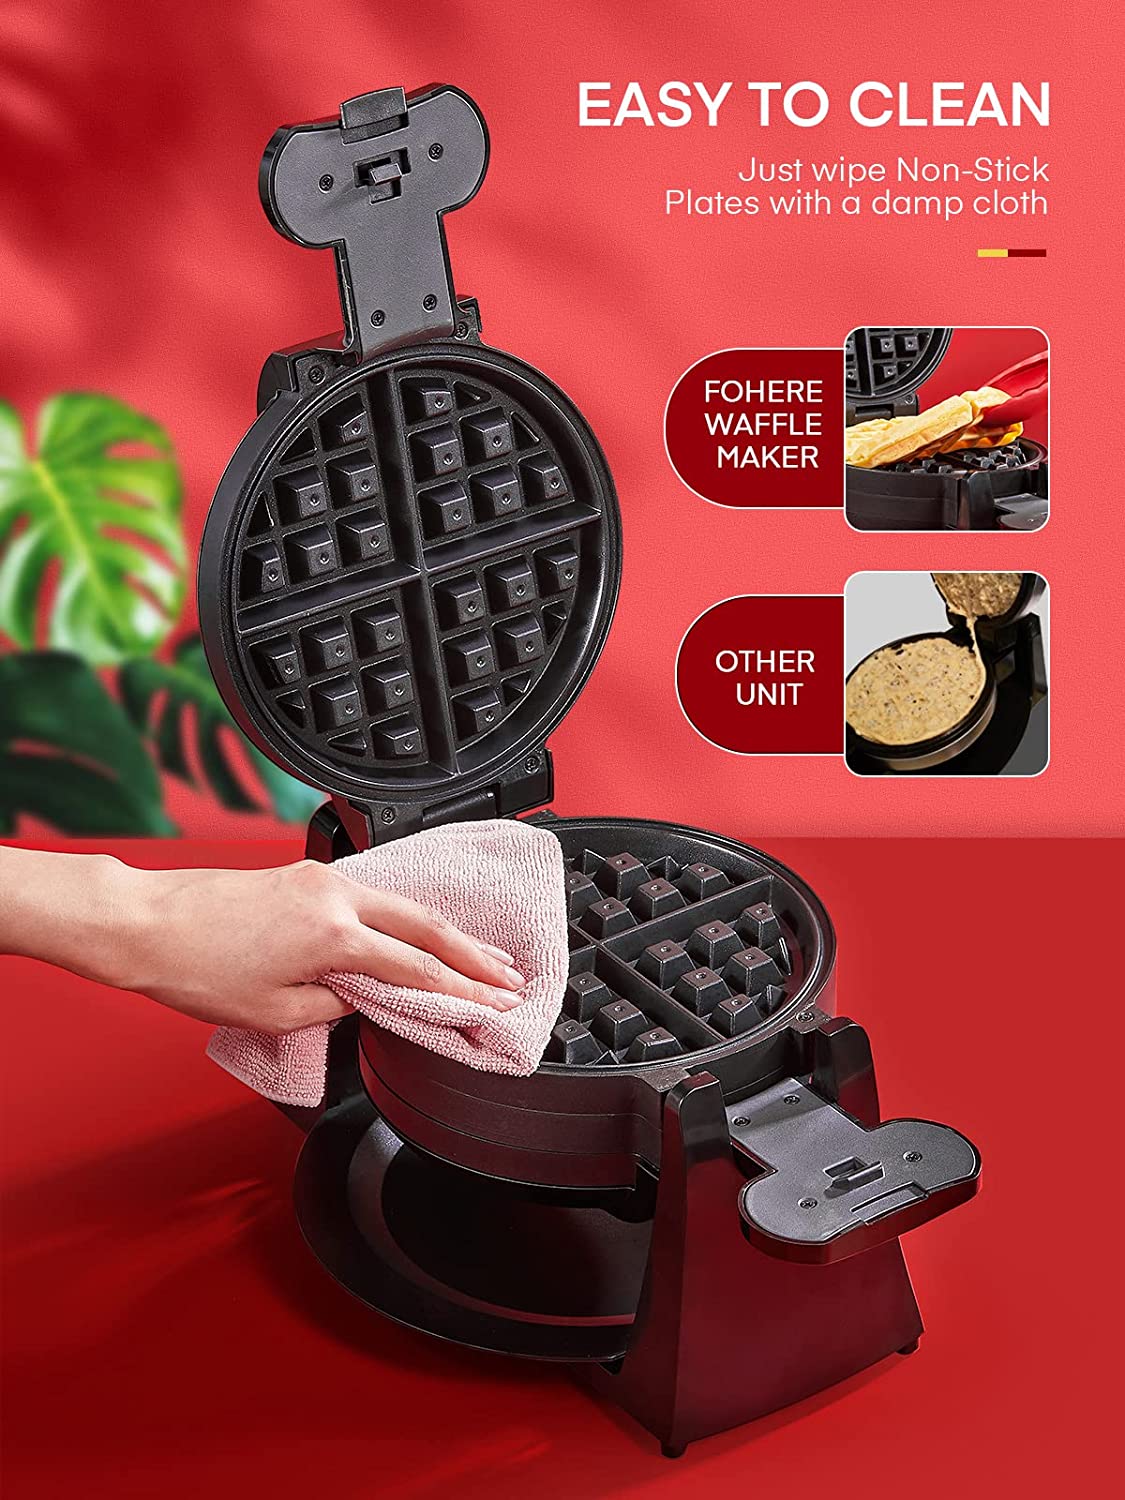 easy to clean, Waffle Maker, Belgian Waffle Maker Iron 180° Flip Double Waffle, 8 Slices, Rotating & Nonstick Plates, Removable Drip Tray, Cool Touch Handle, Black, 1400W